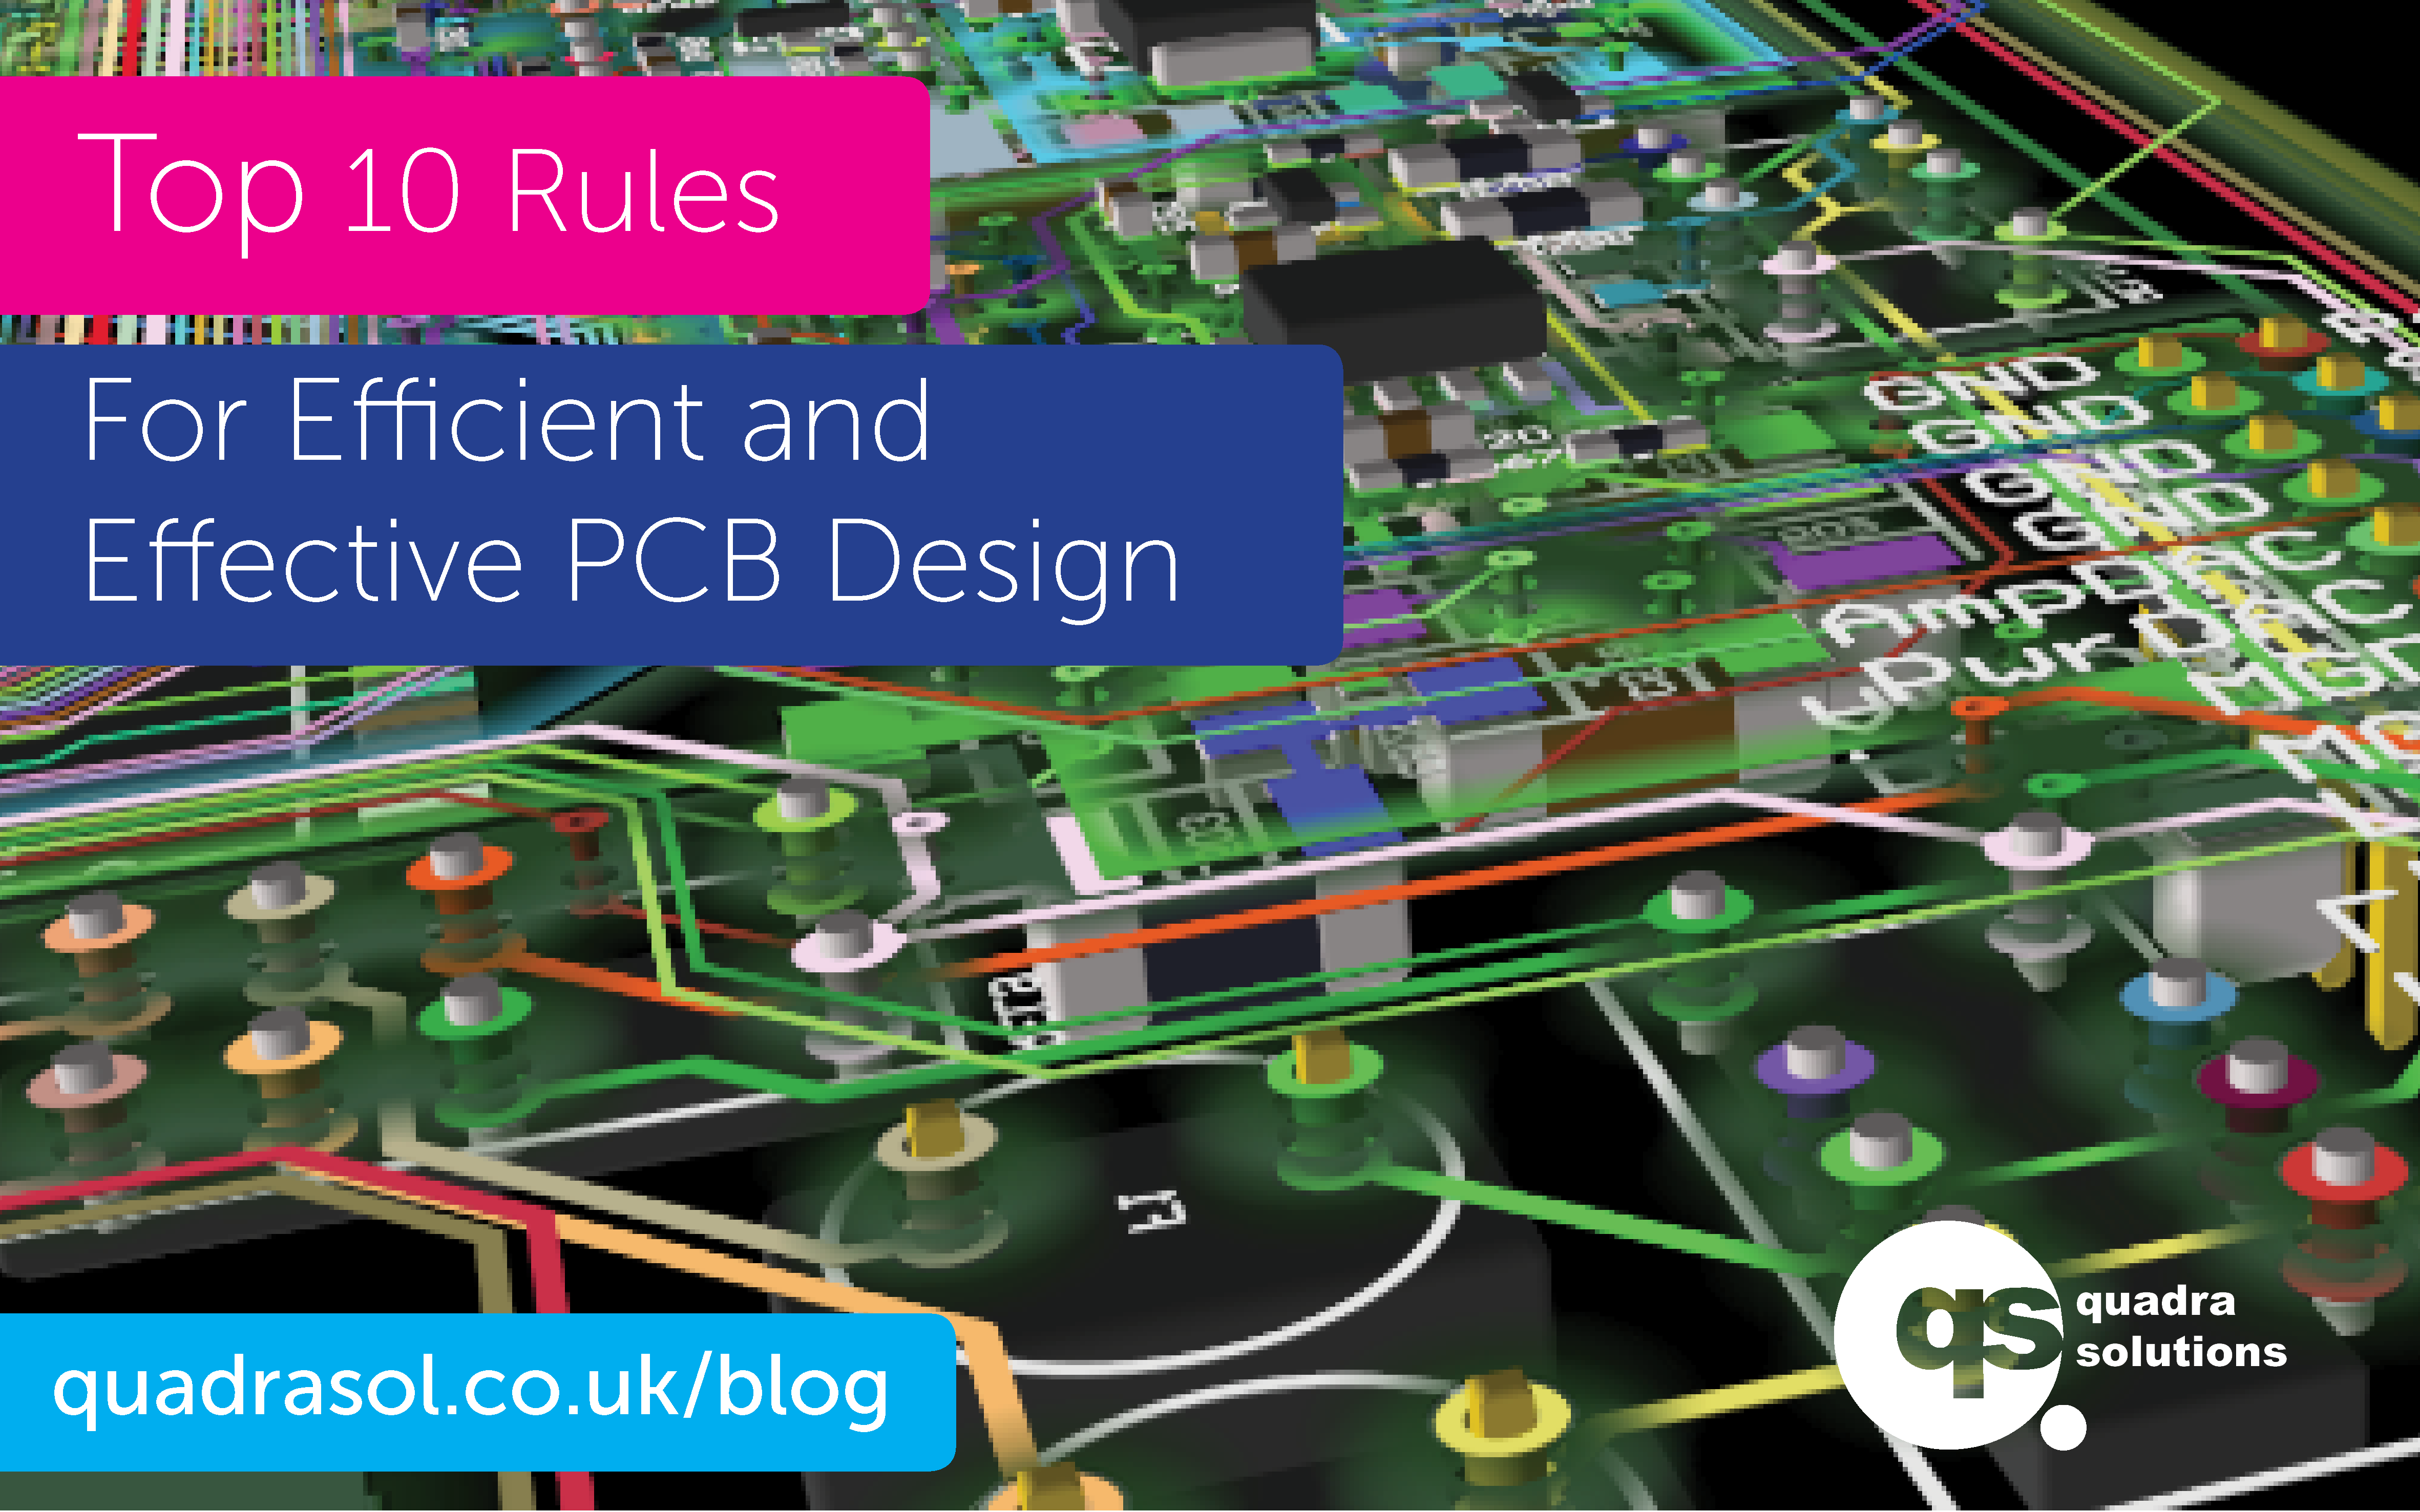 Top 10 Efficient and Effective PCB Design Rules